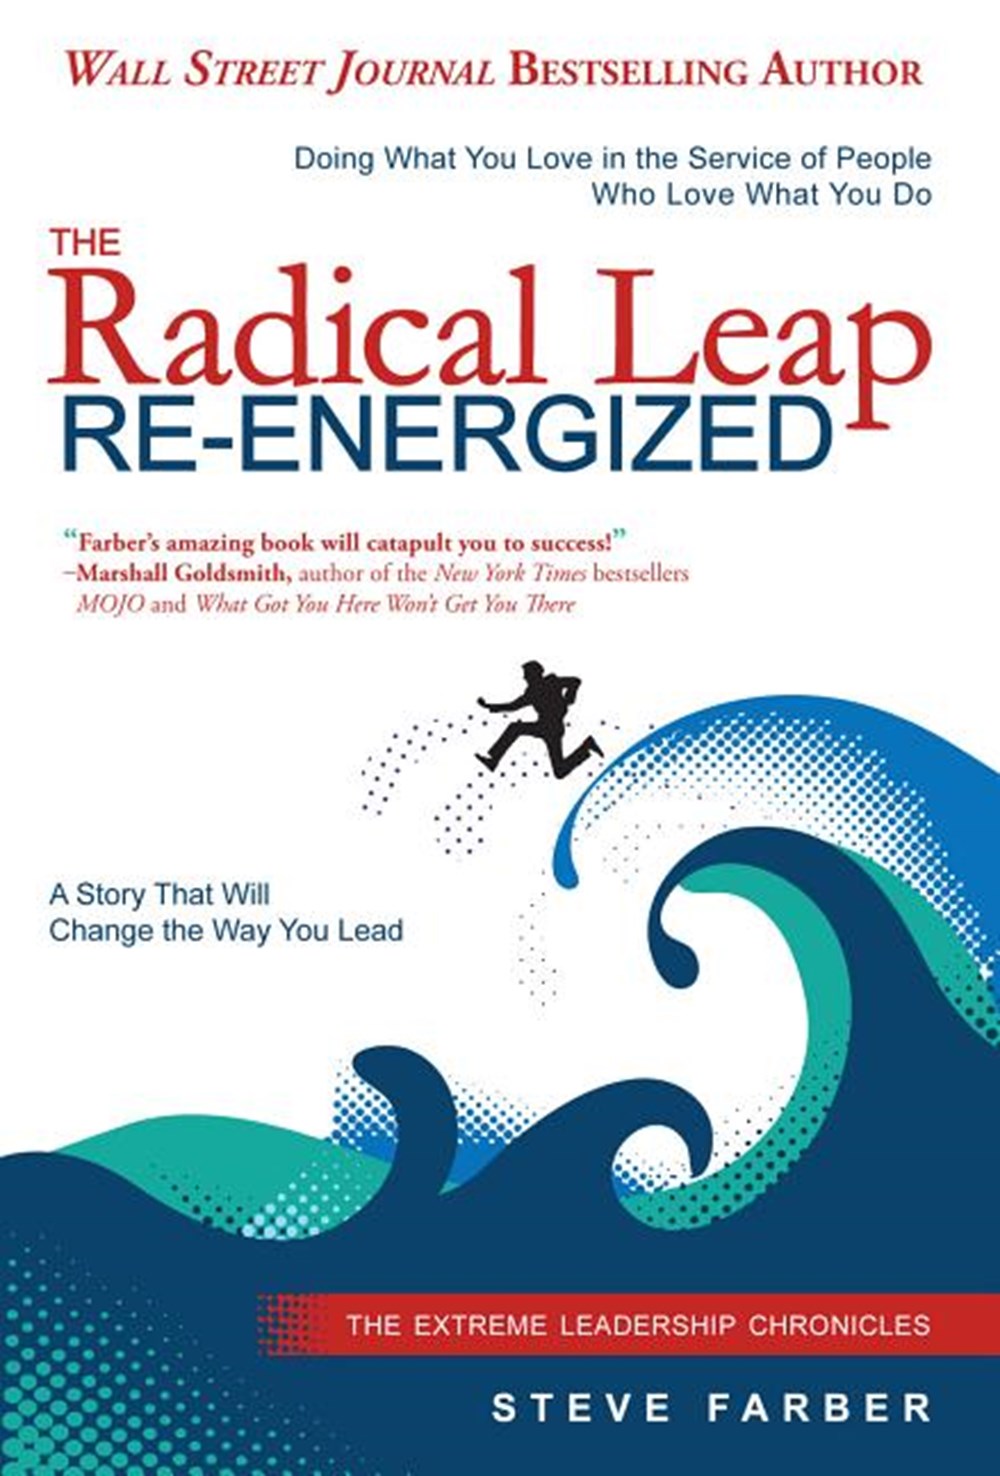 Radical Leap Re-Energized: Doing What You Love in the Service of People Who Love What You Do